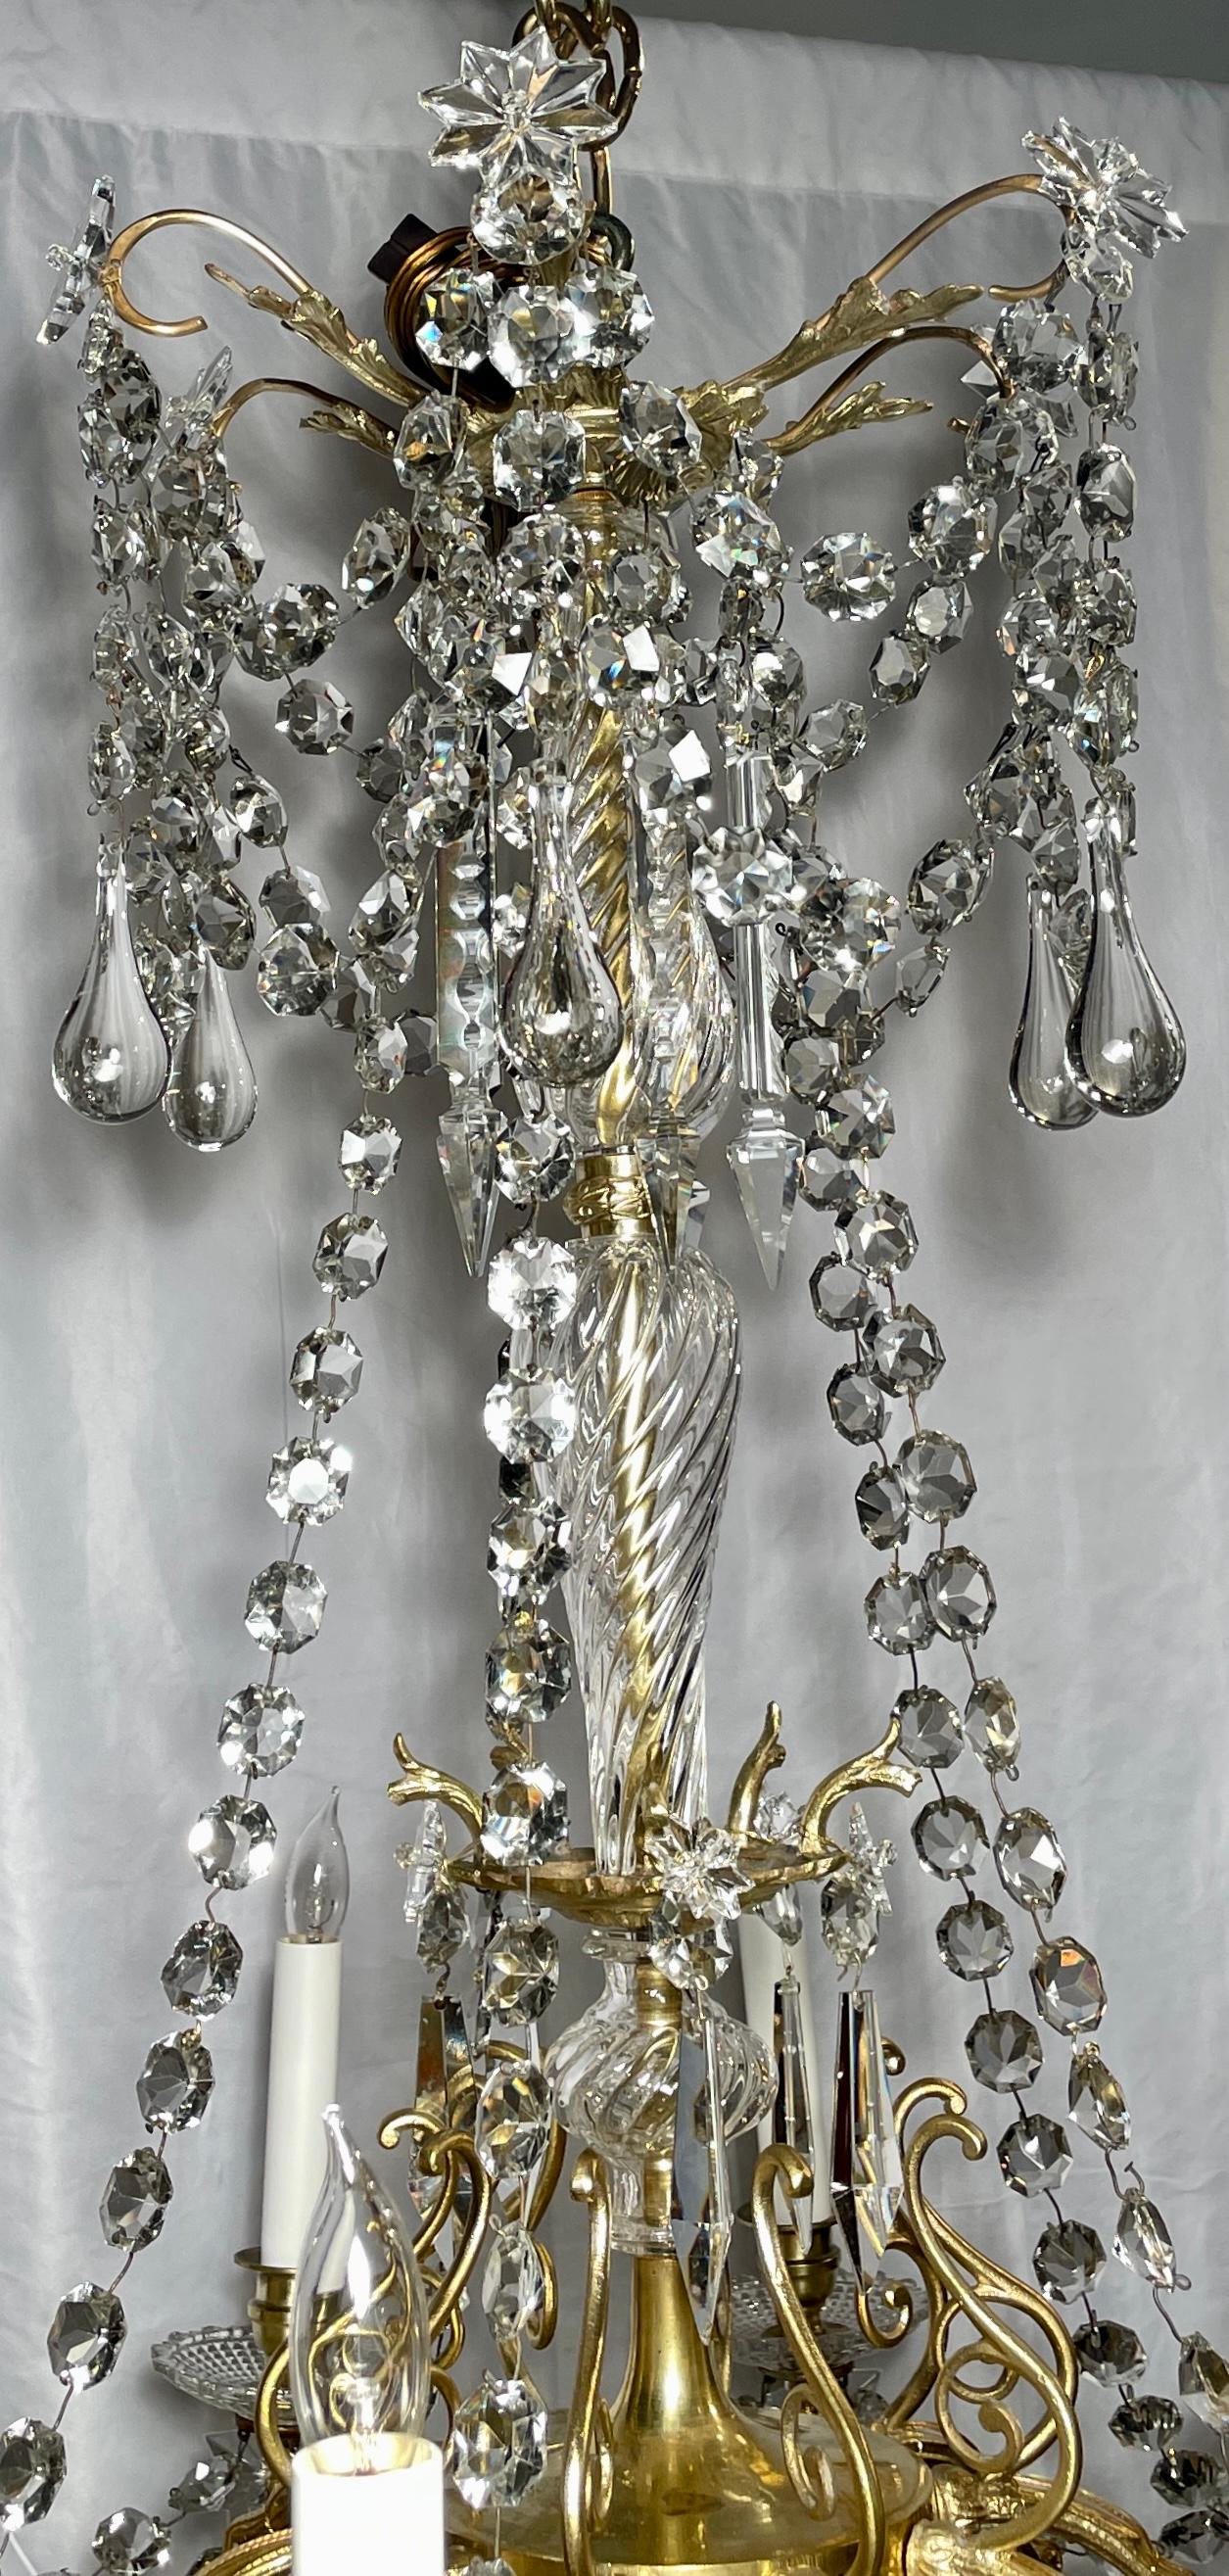 Antique late 19th century cut crystal and gold bronze 10-light chandelier, circa 1890-1900.